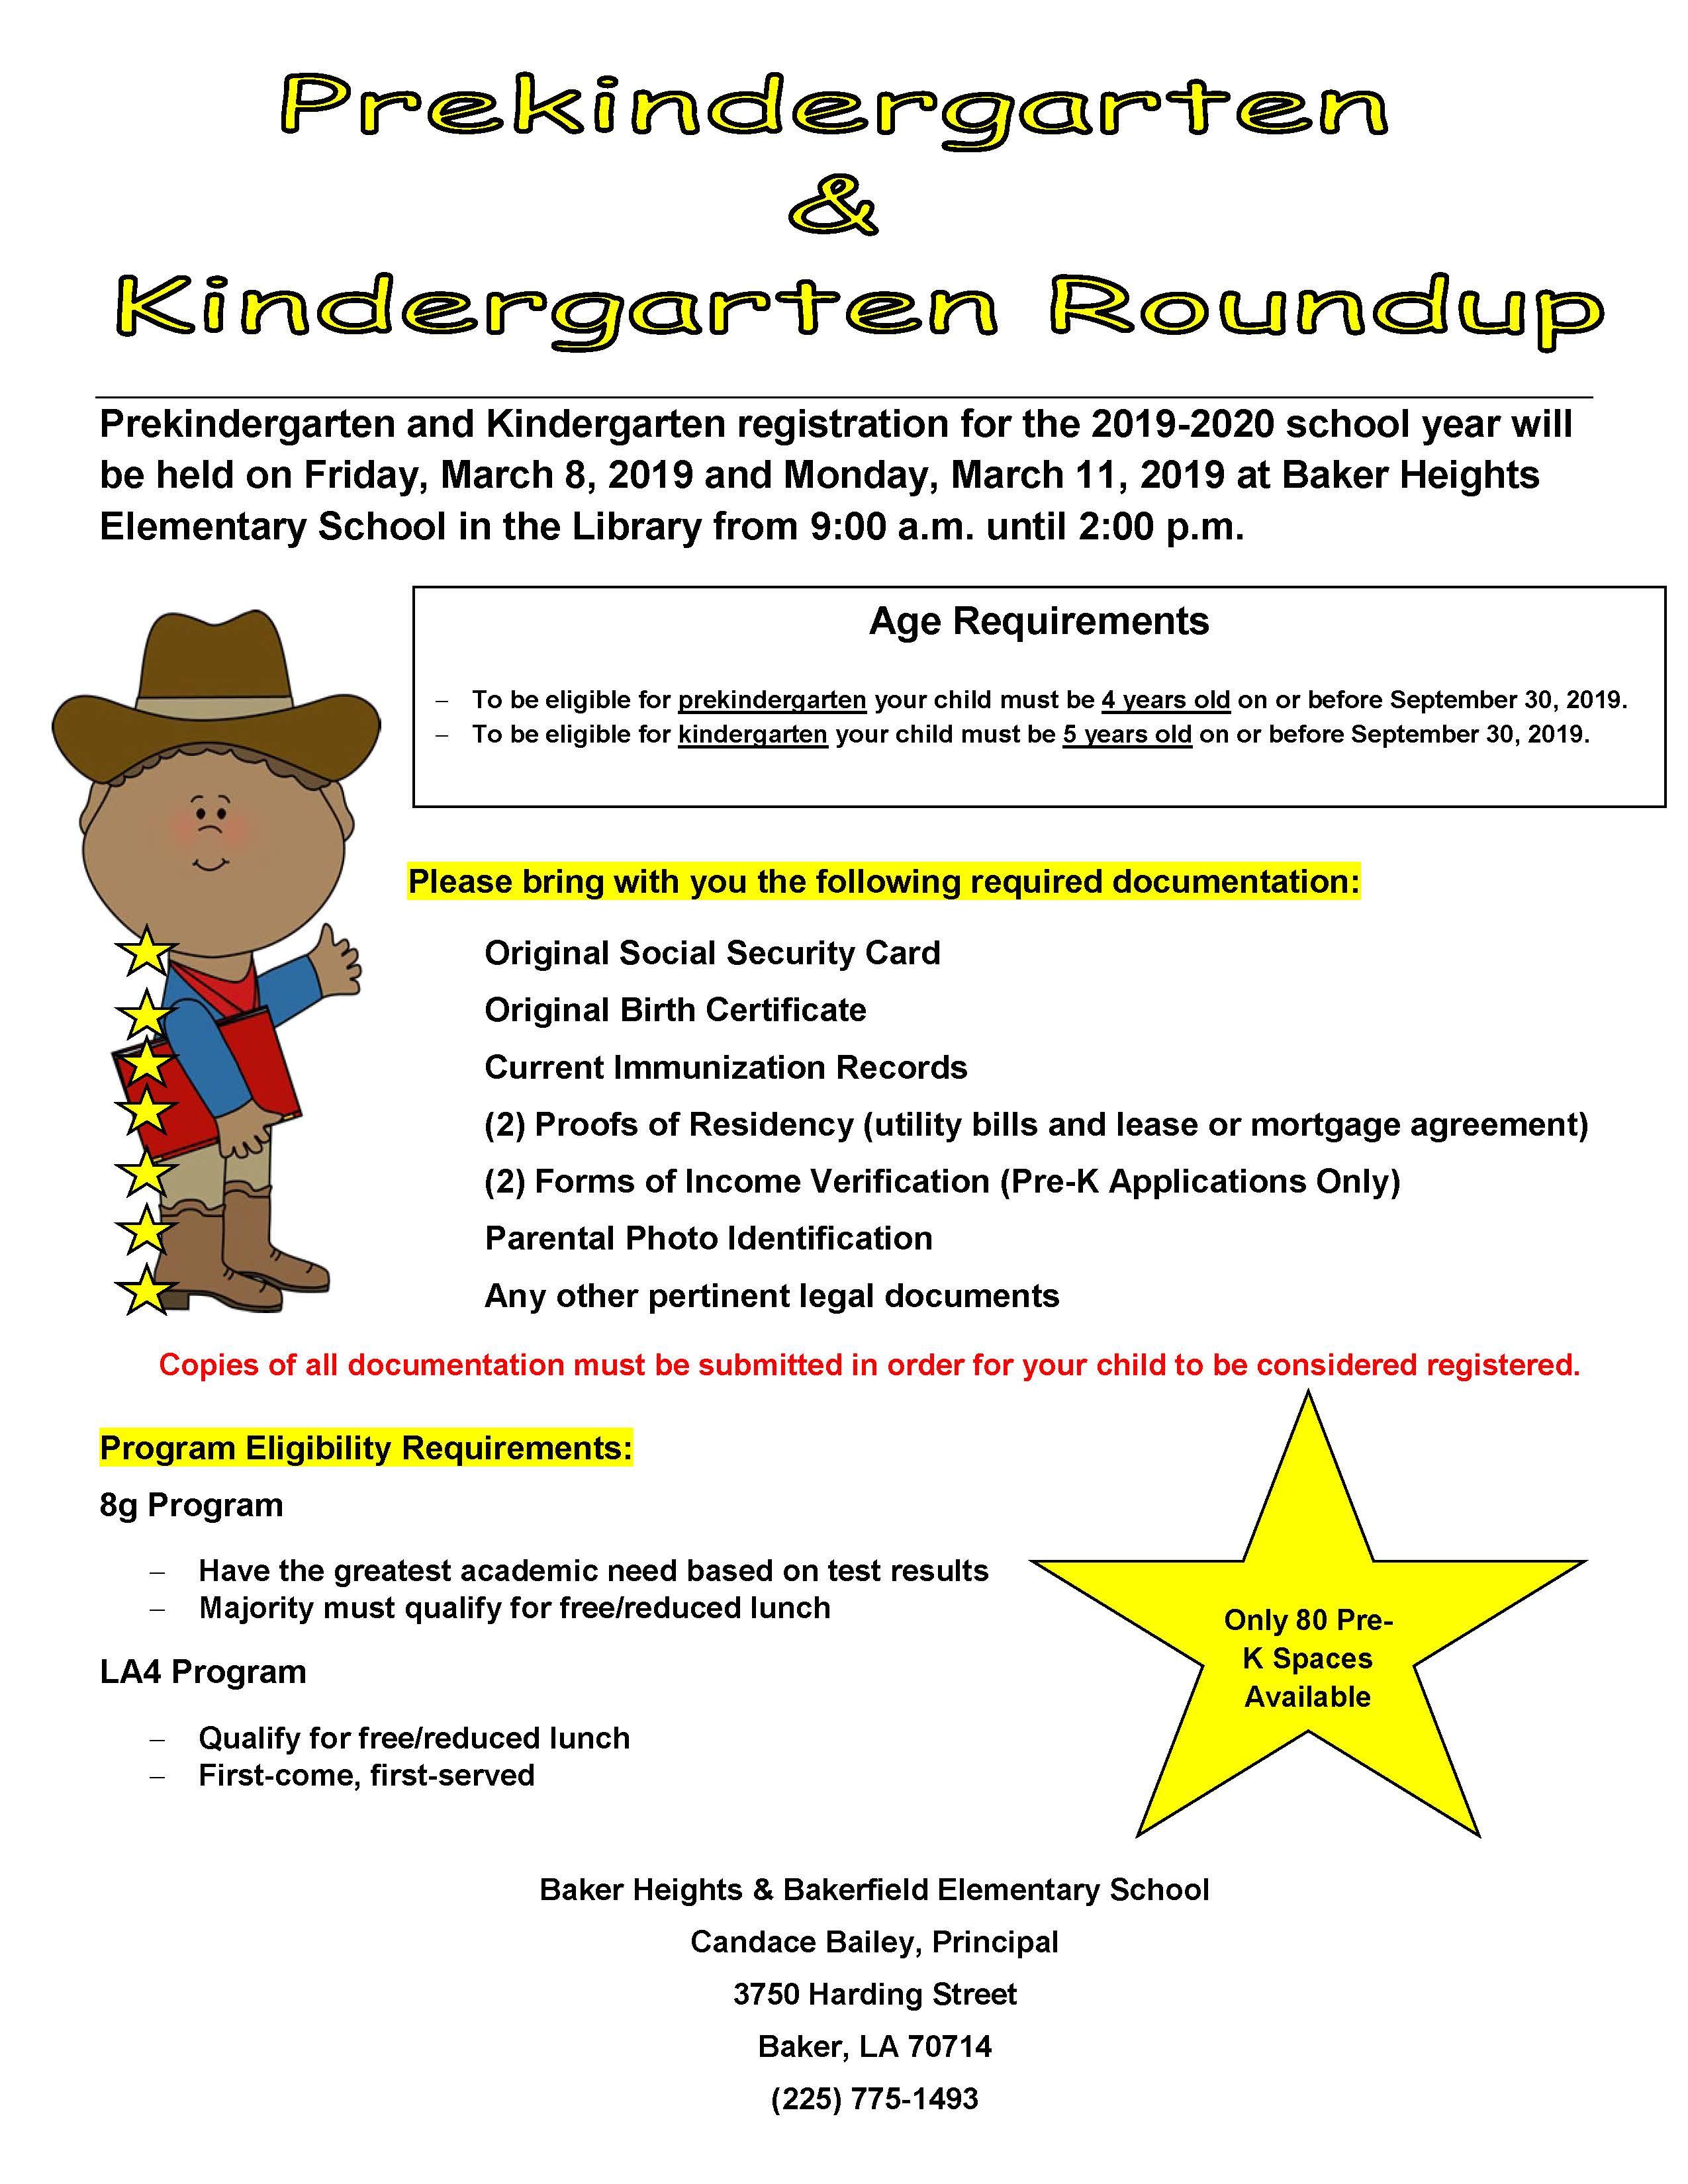  a photo of the 2019-20 Pre-K and K roundup announcement